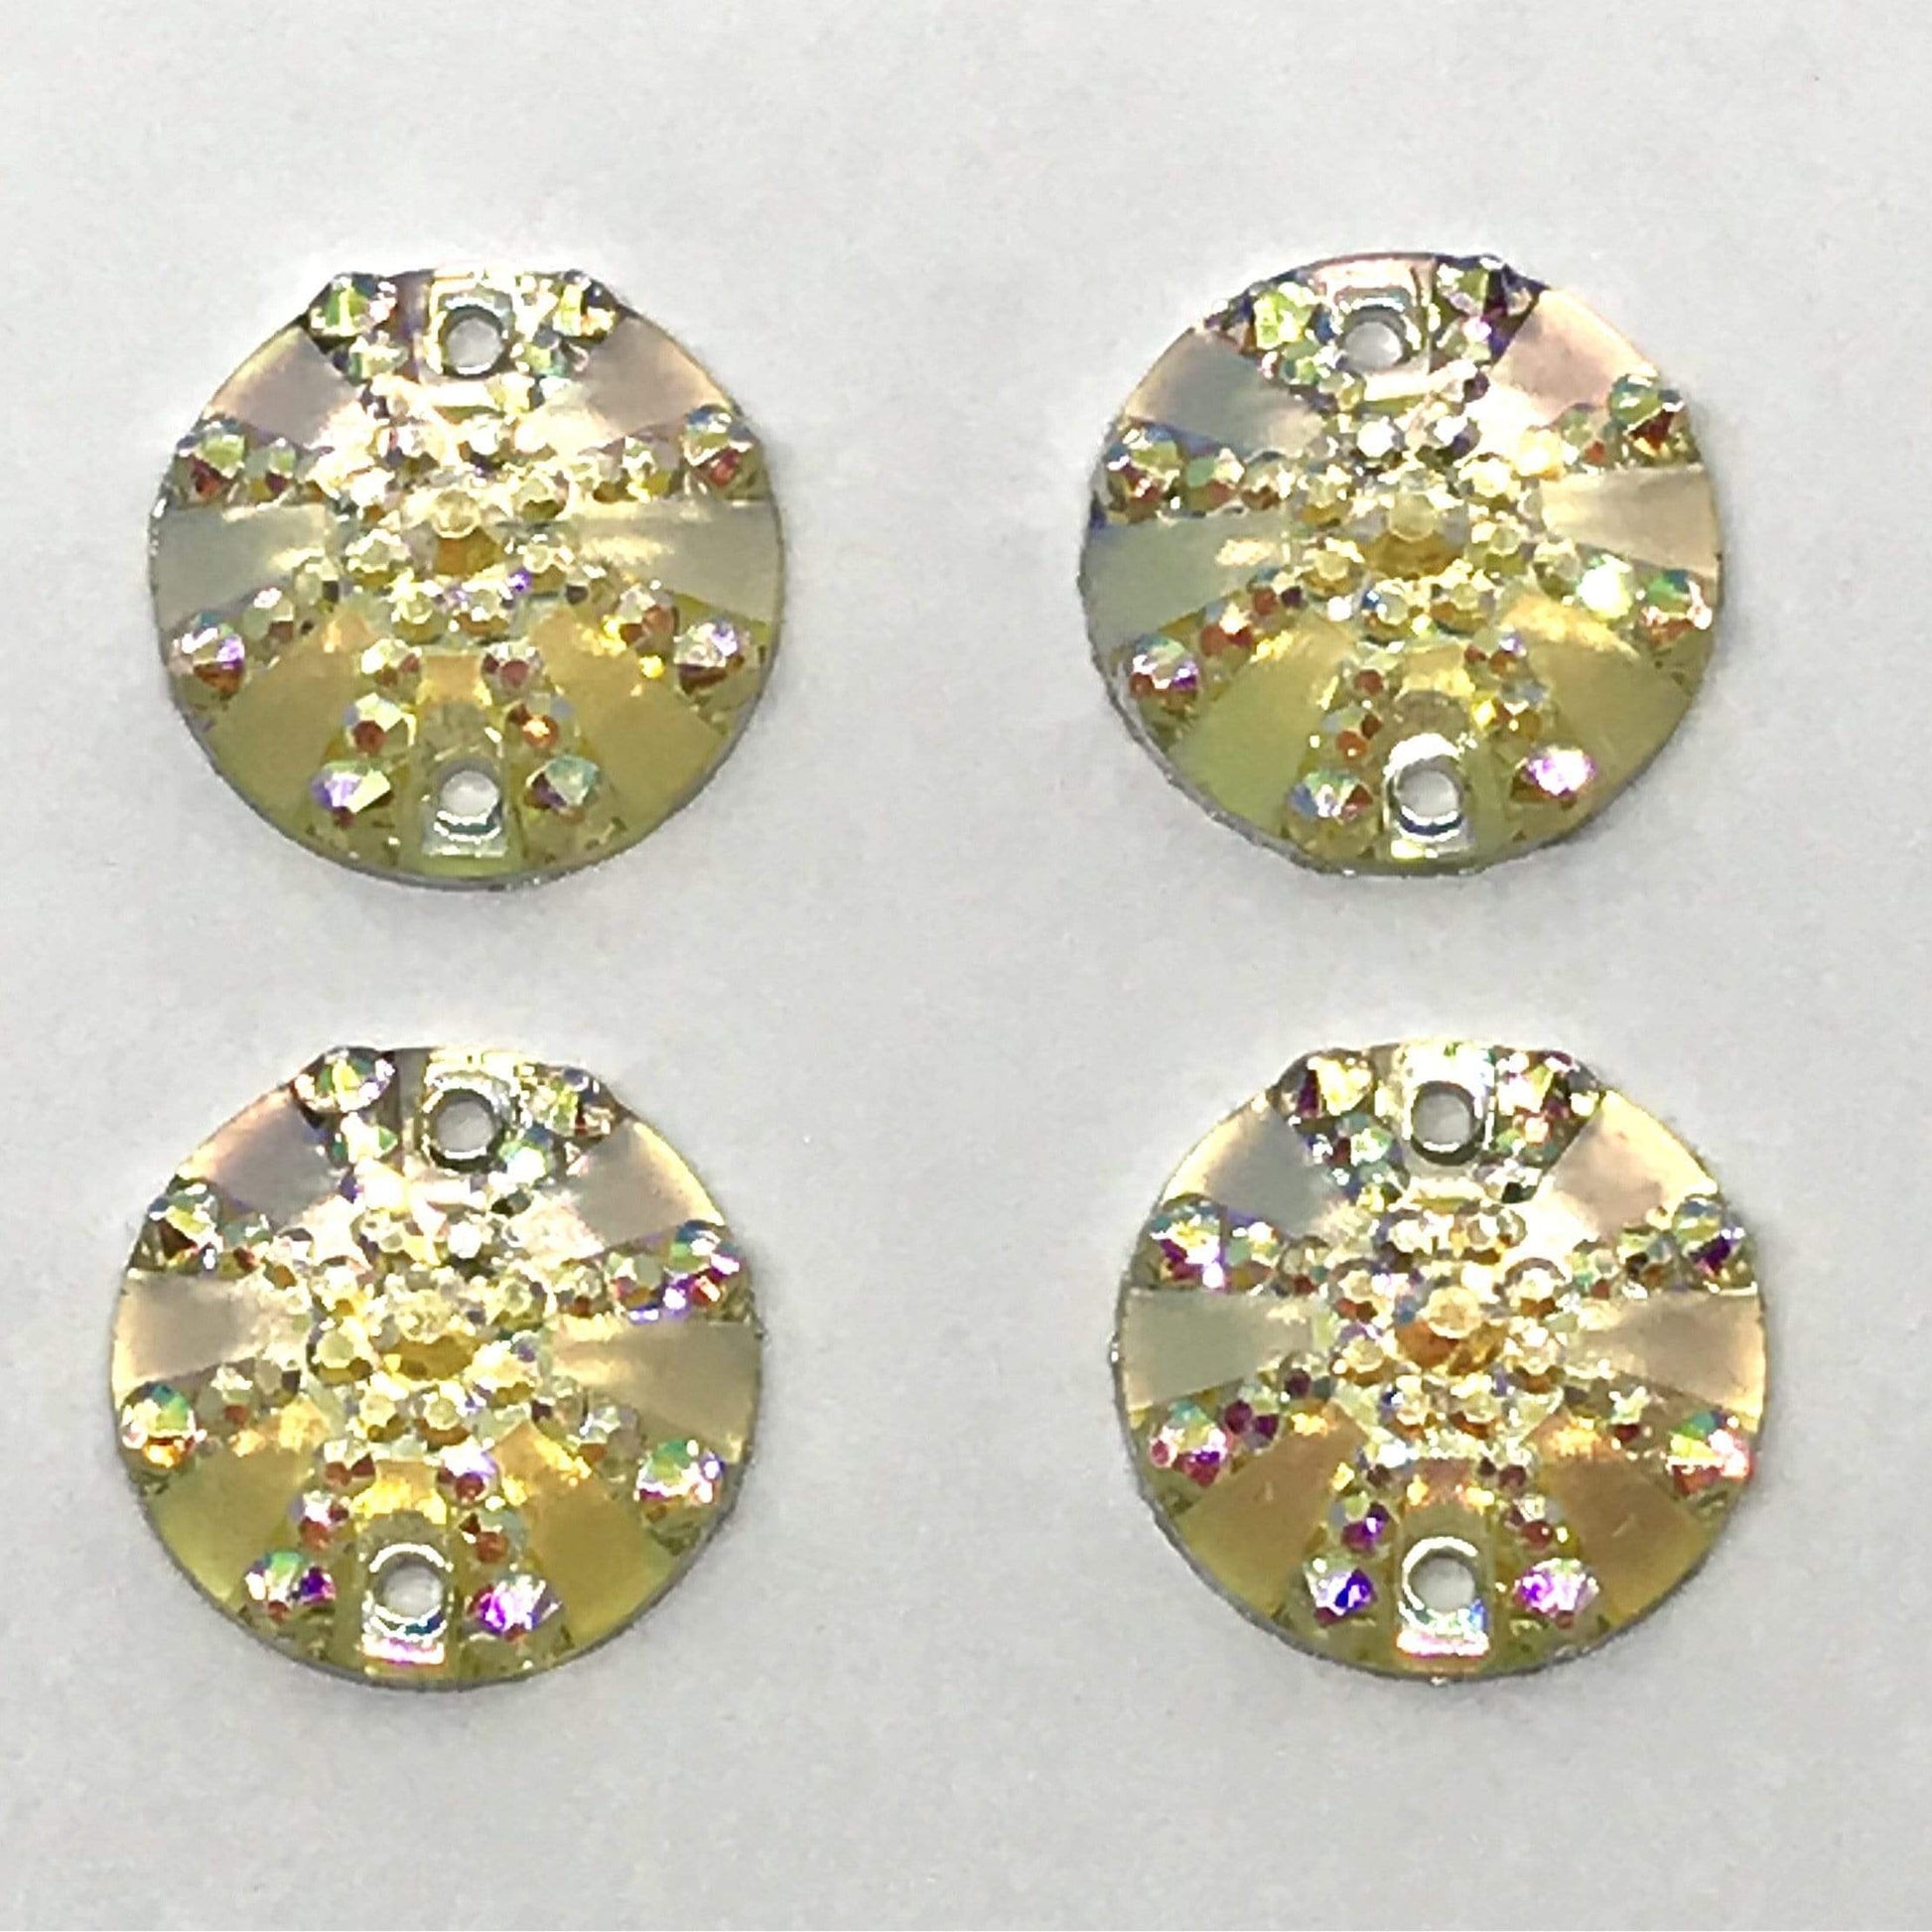 Sundaylace Creations & Bling Resin Gems 14mm Round AB with Starburst pattern Resin Gem, Sew on